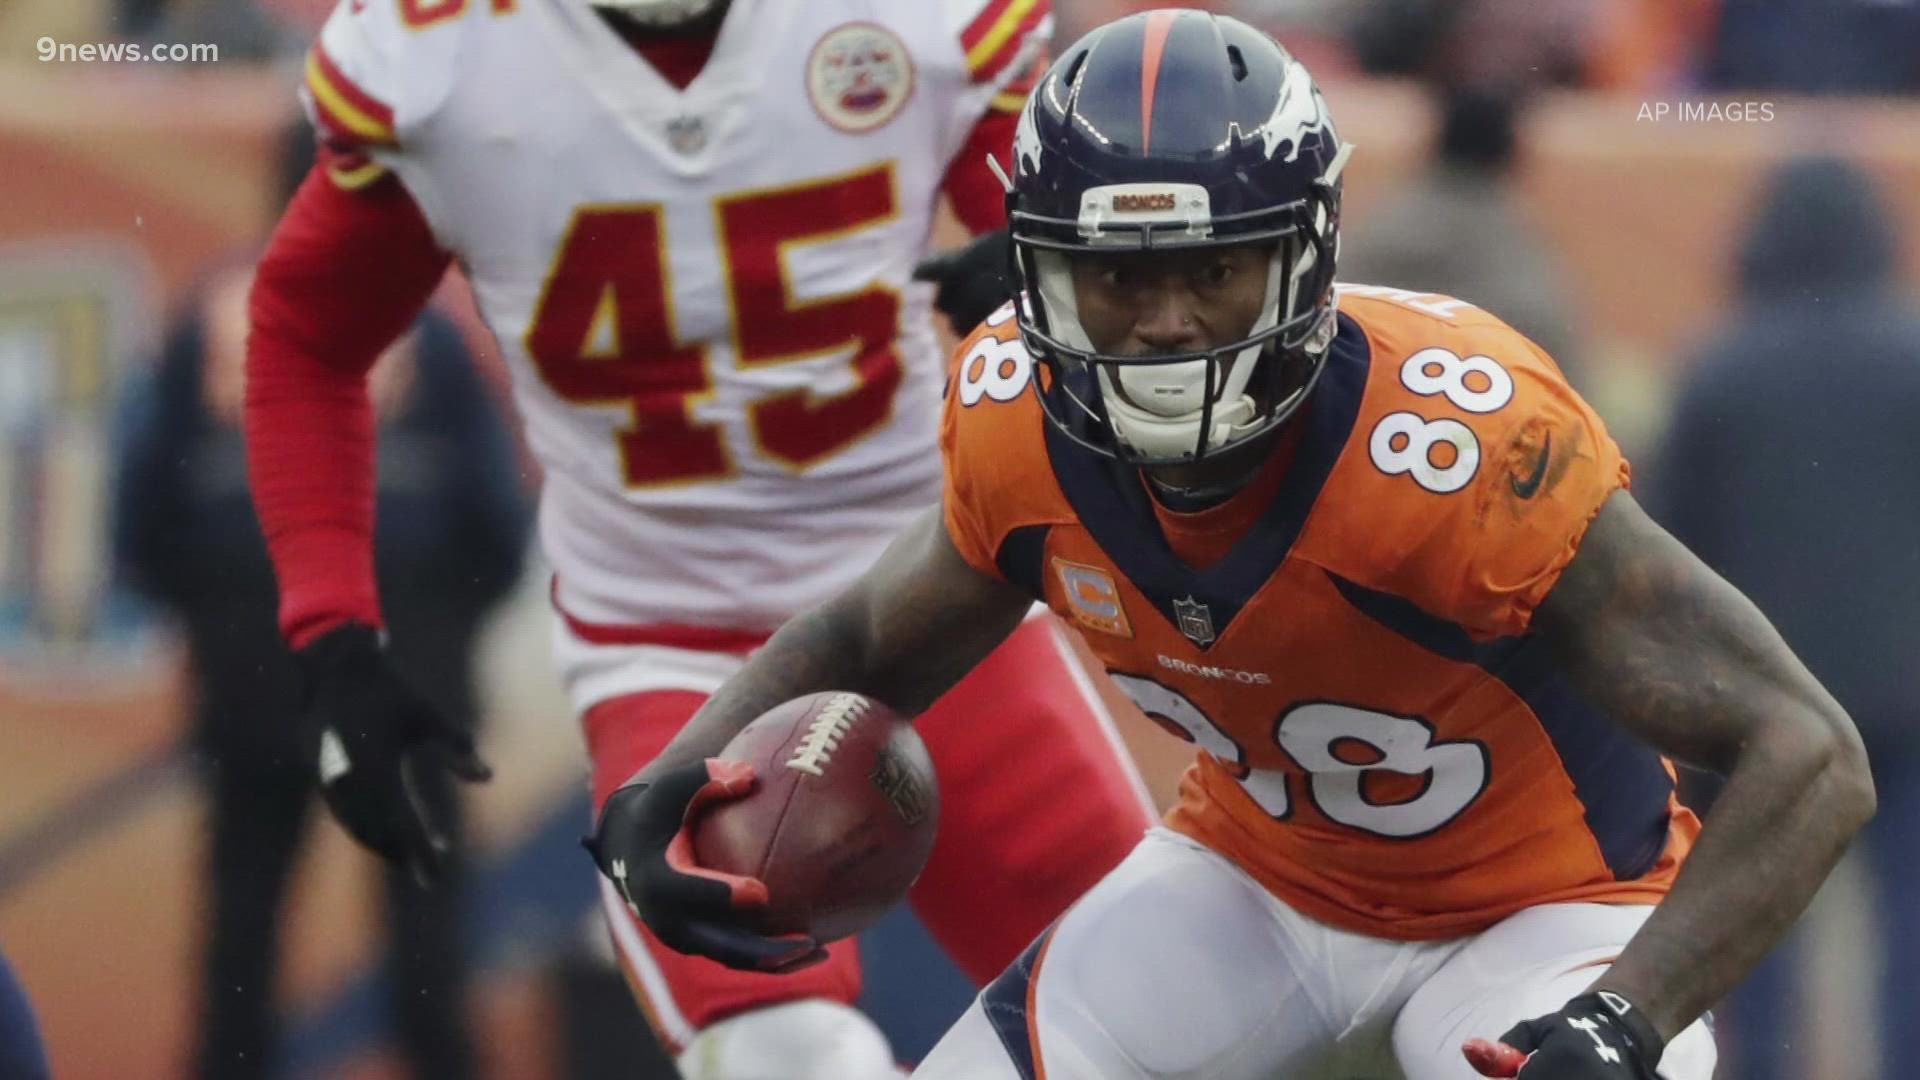 Demaryius Thomas, the former West Laurens Raider who became one of the most talented receivers in Denver Broncos franchise history, has died at age 33